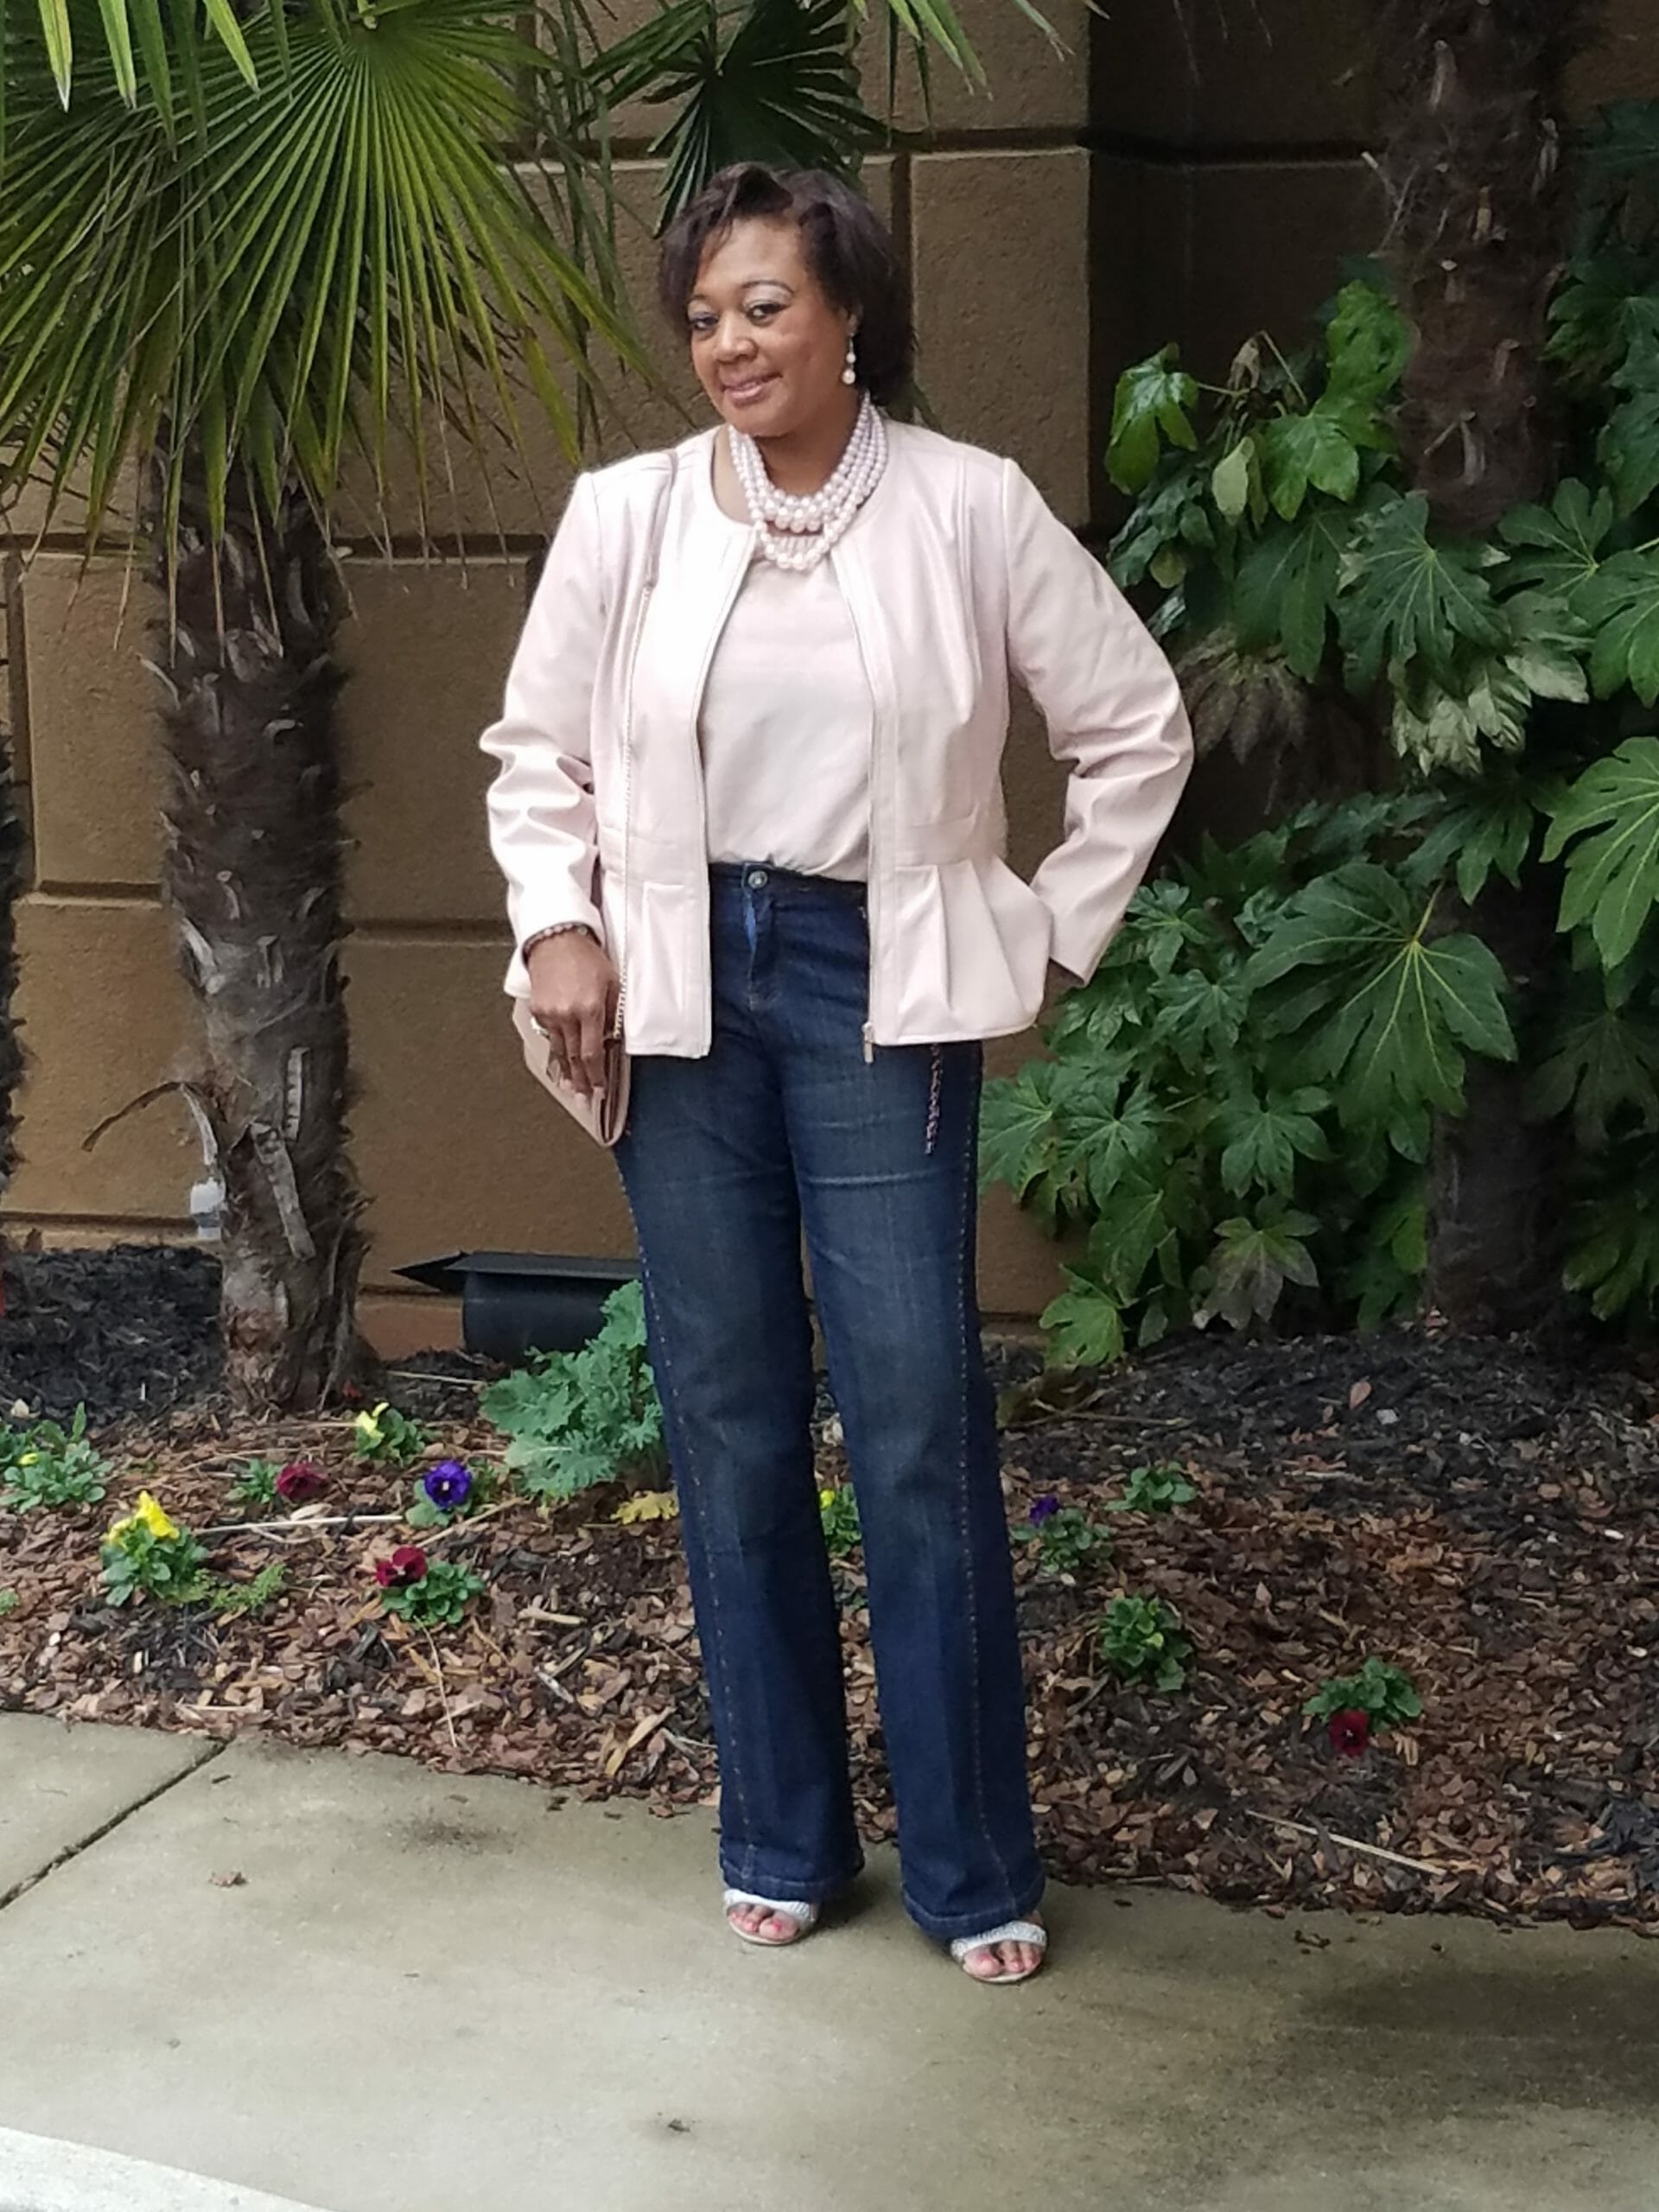 A Midnight Velvet customer by a palm tree, in a blush top and peplum jacket set, jeans, and a pearl necklace.